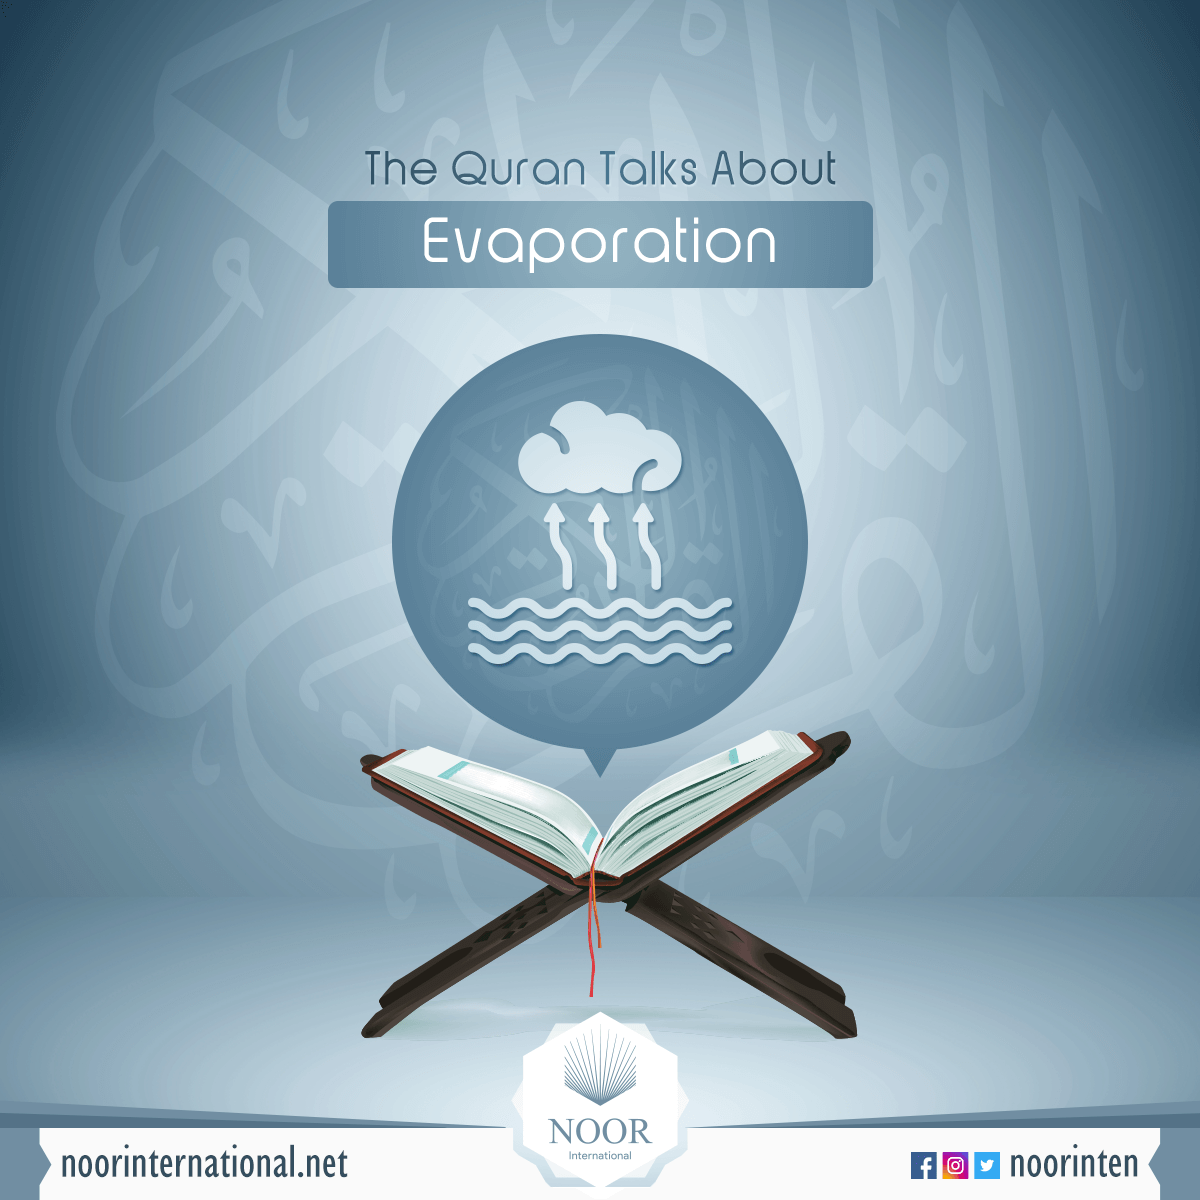 The Quran Talks About The Evaporation